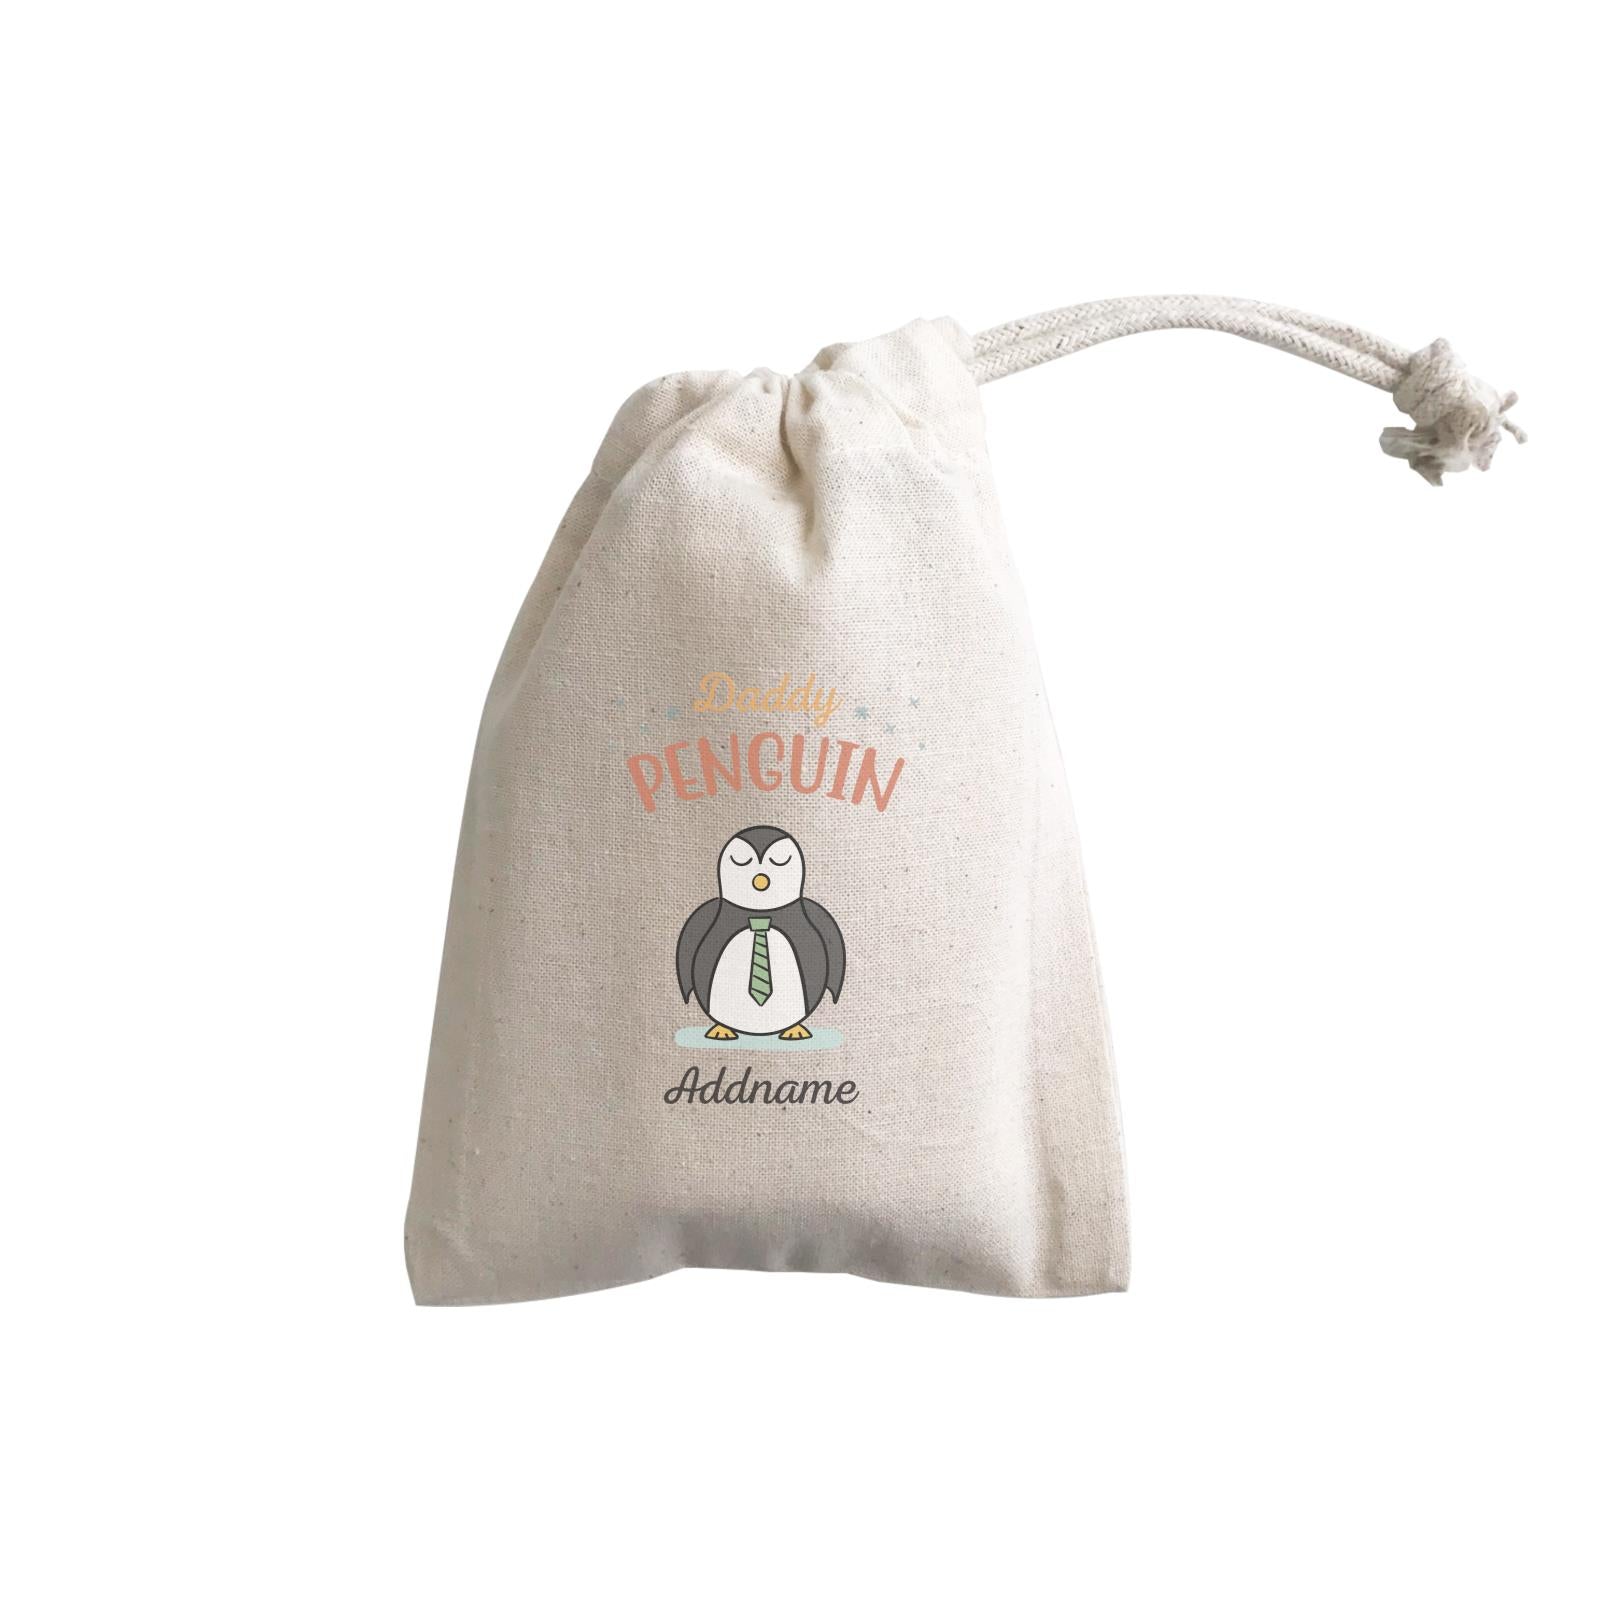 Penguin Family Daddy Penguin Addname GP Gift Pouch